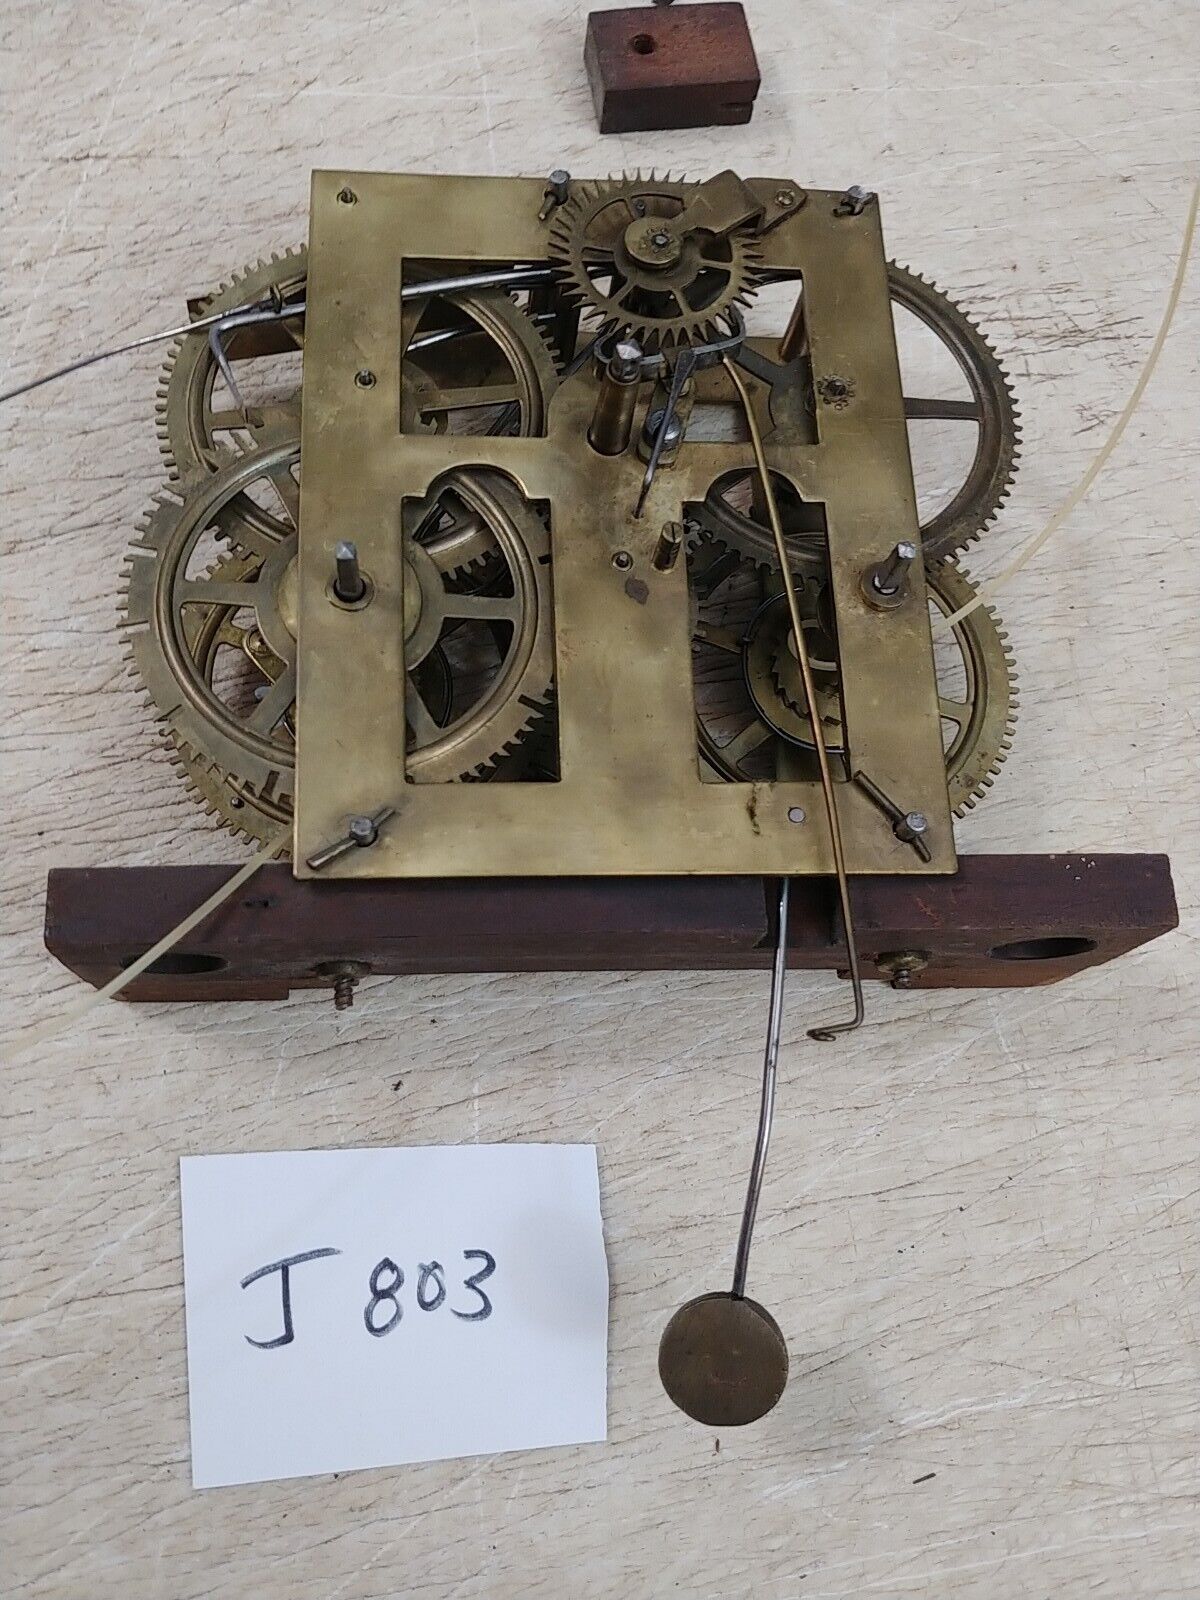 ANTIQUE CHAUNCEY JEROME OGEE CLOCK MOVEMENT